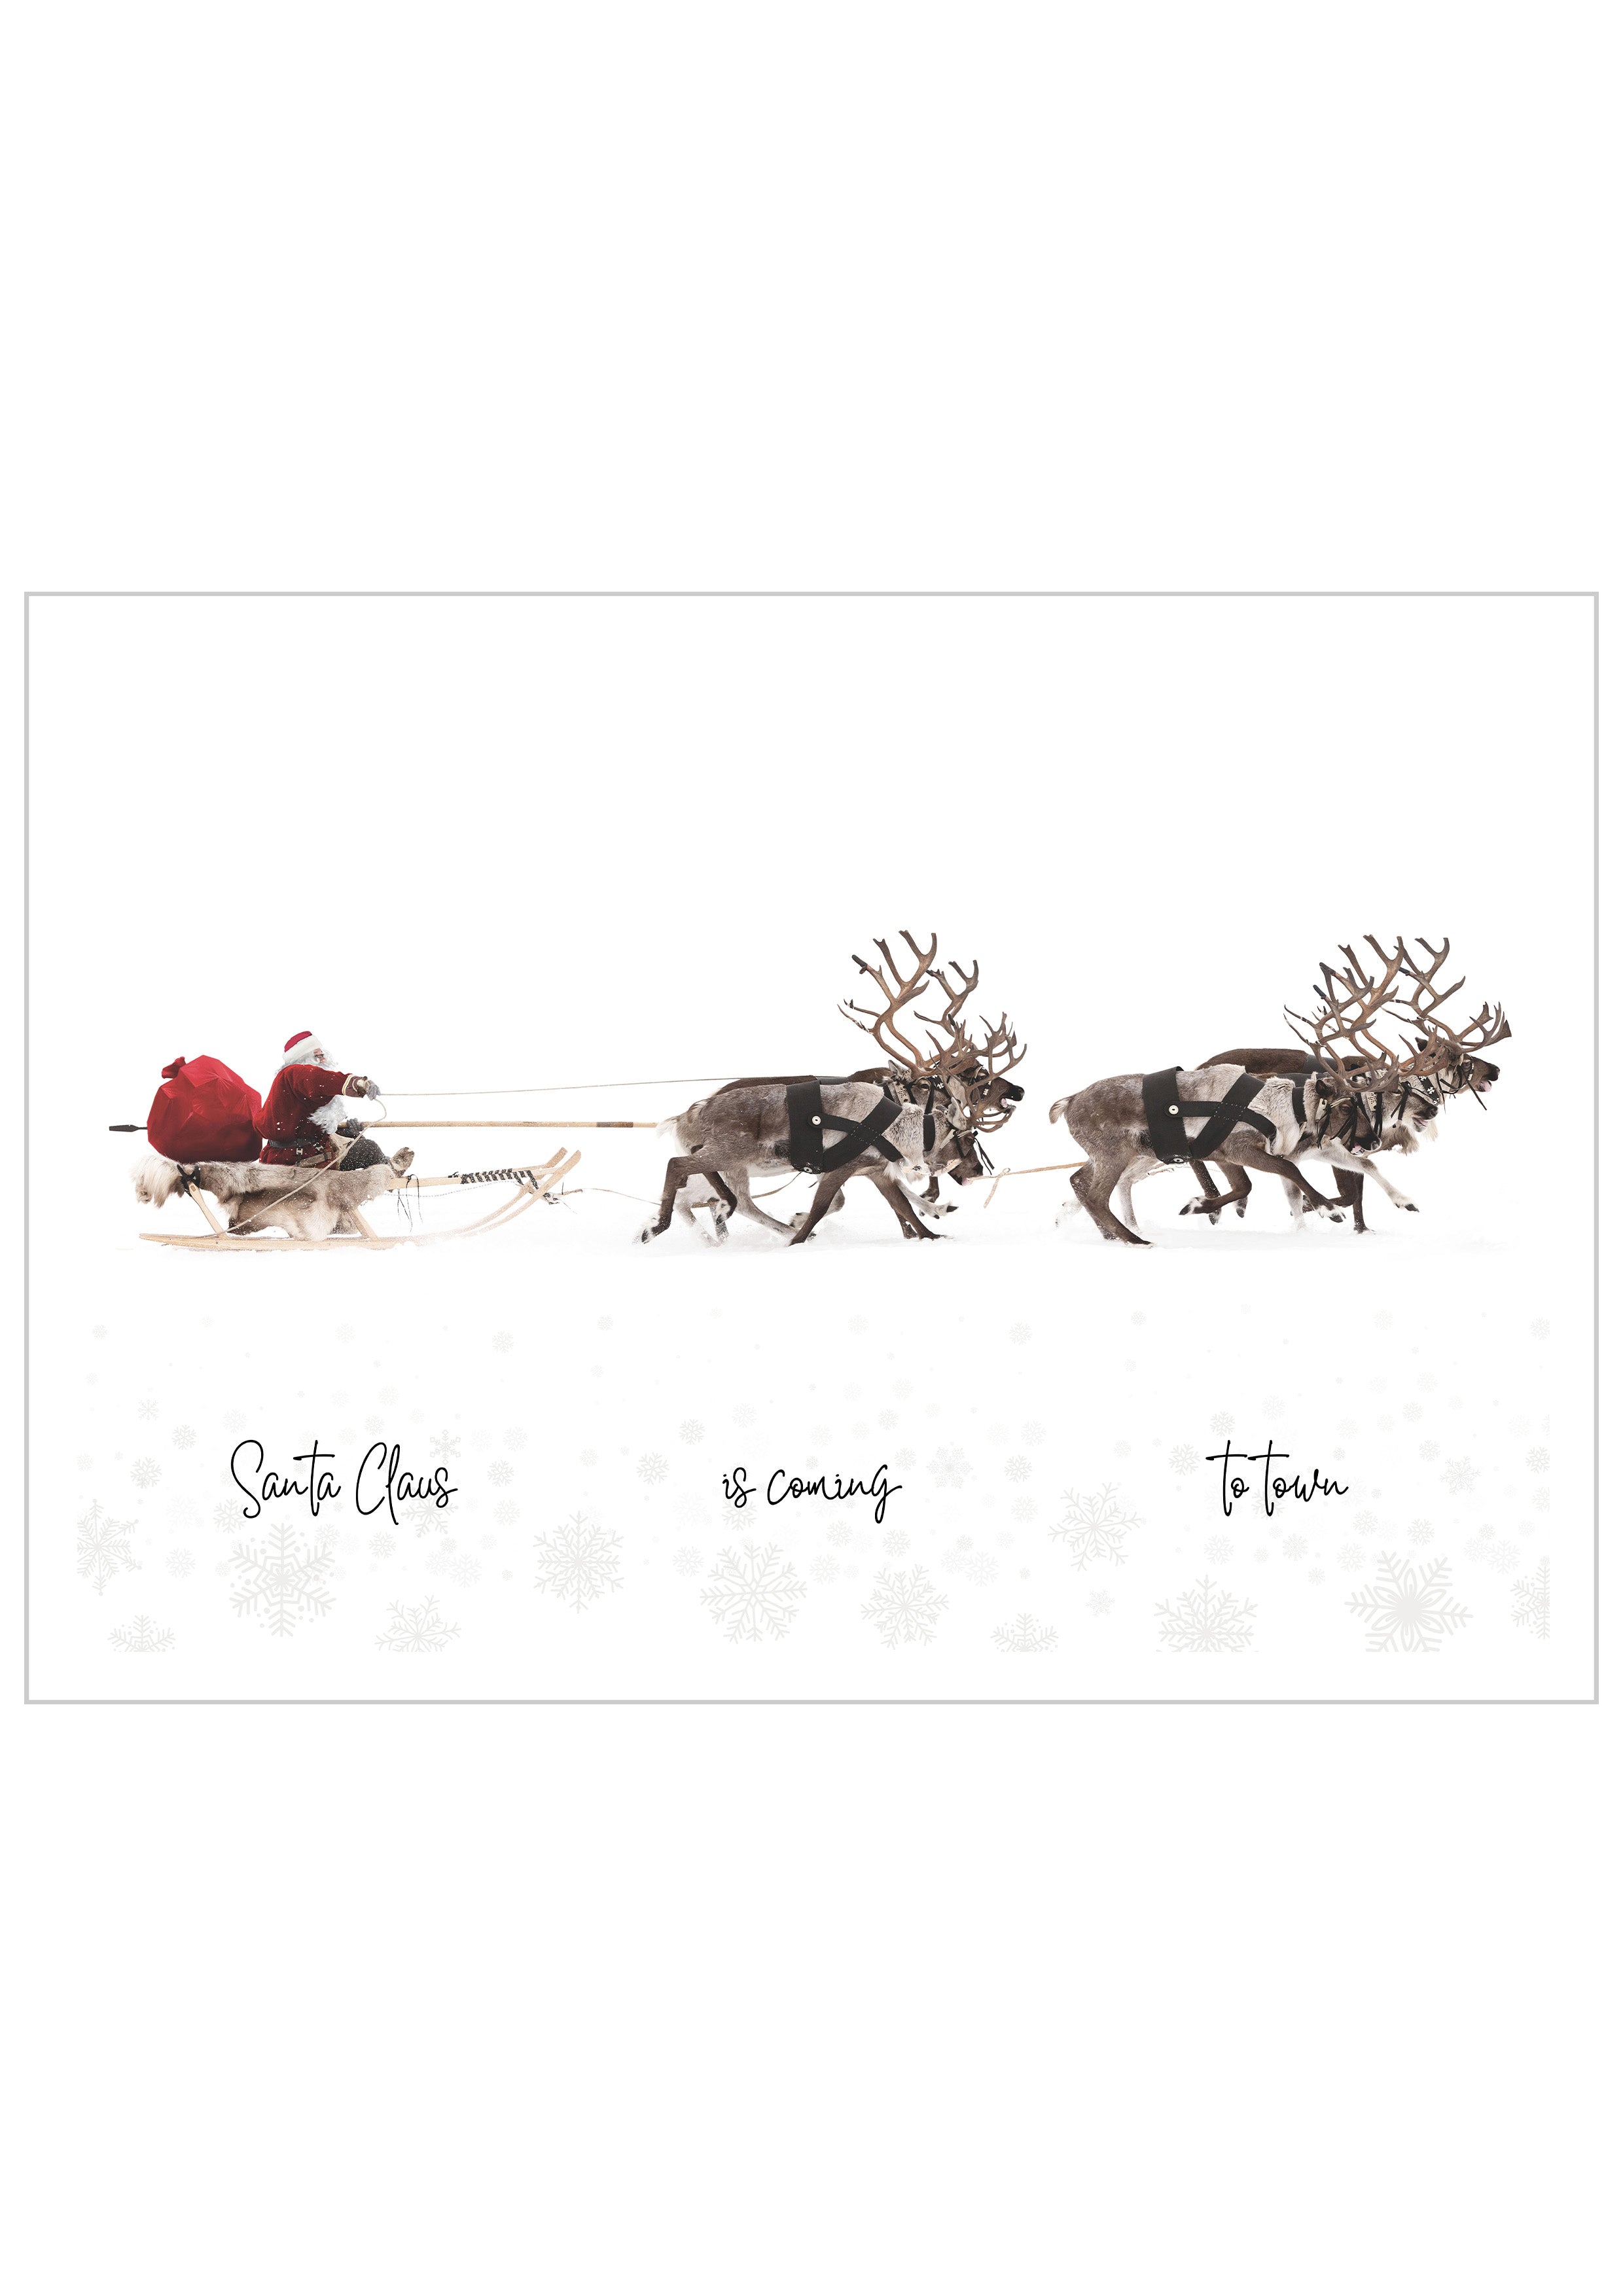 an illustration of Santa Claus in a sleigh with text "Santa Claus is coming to town"